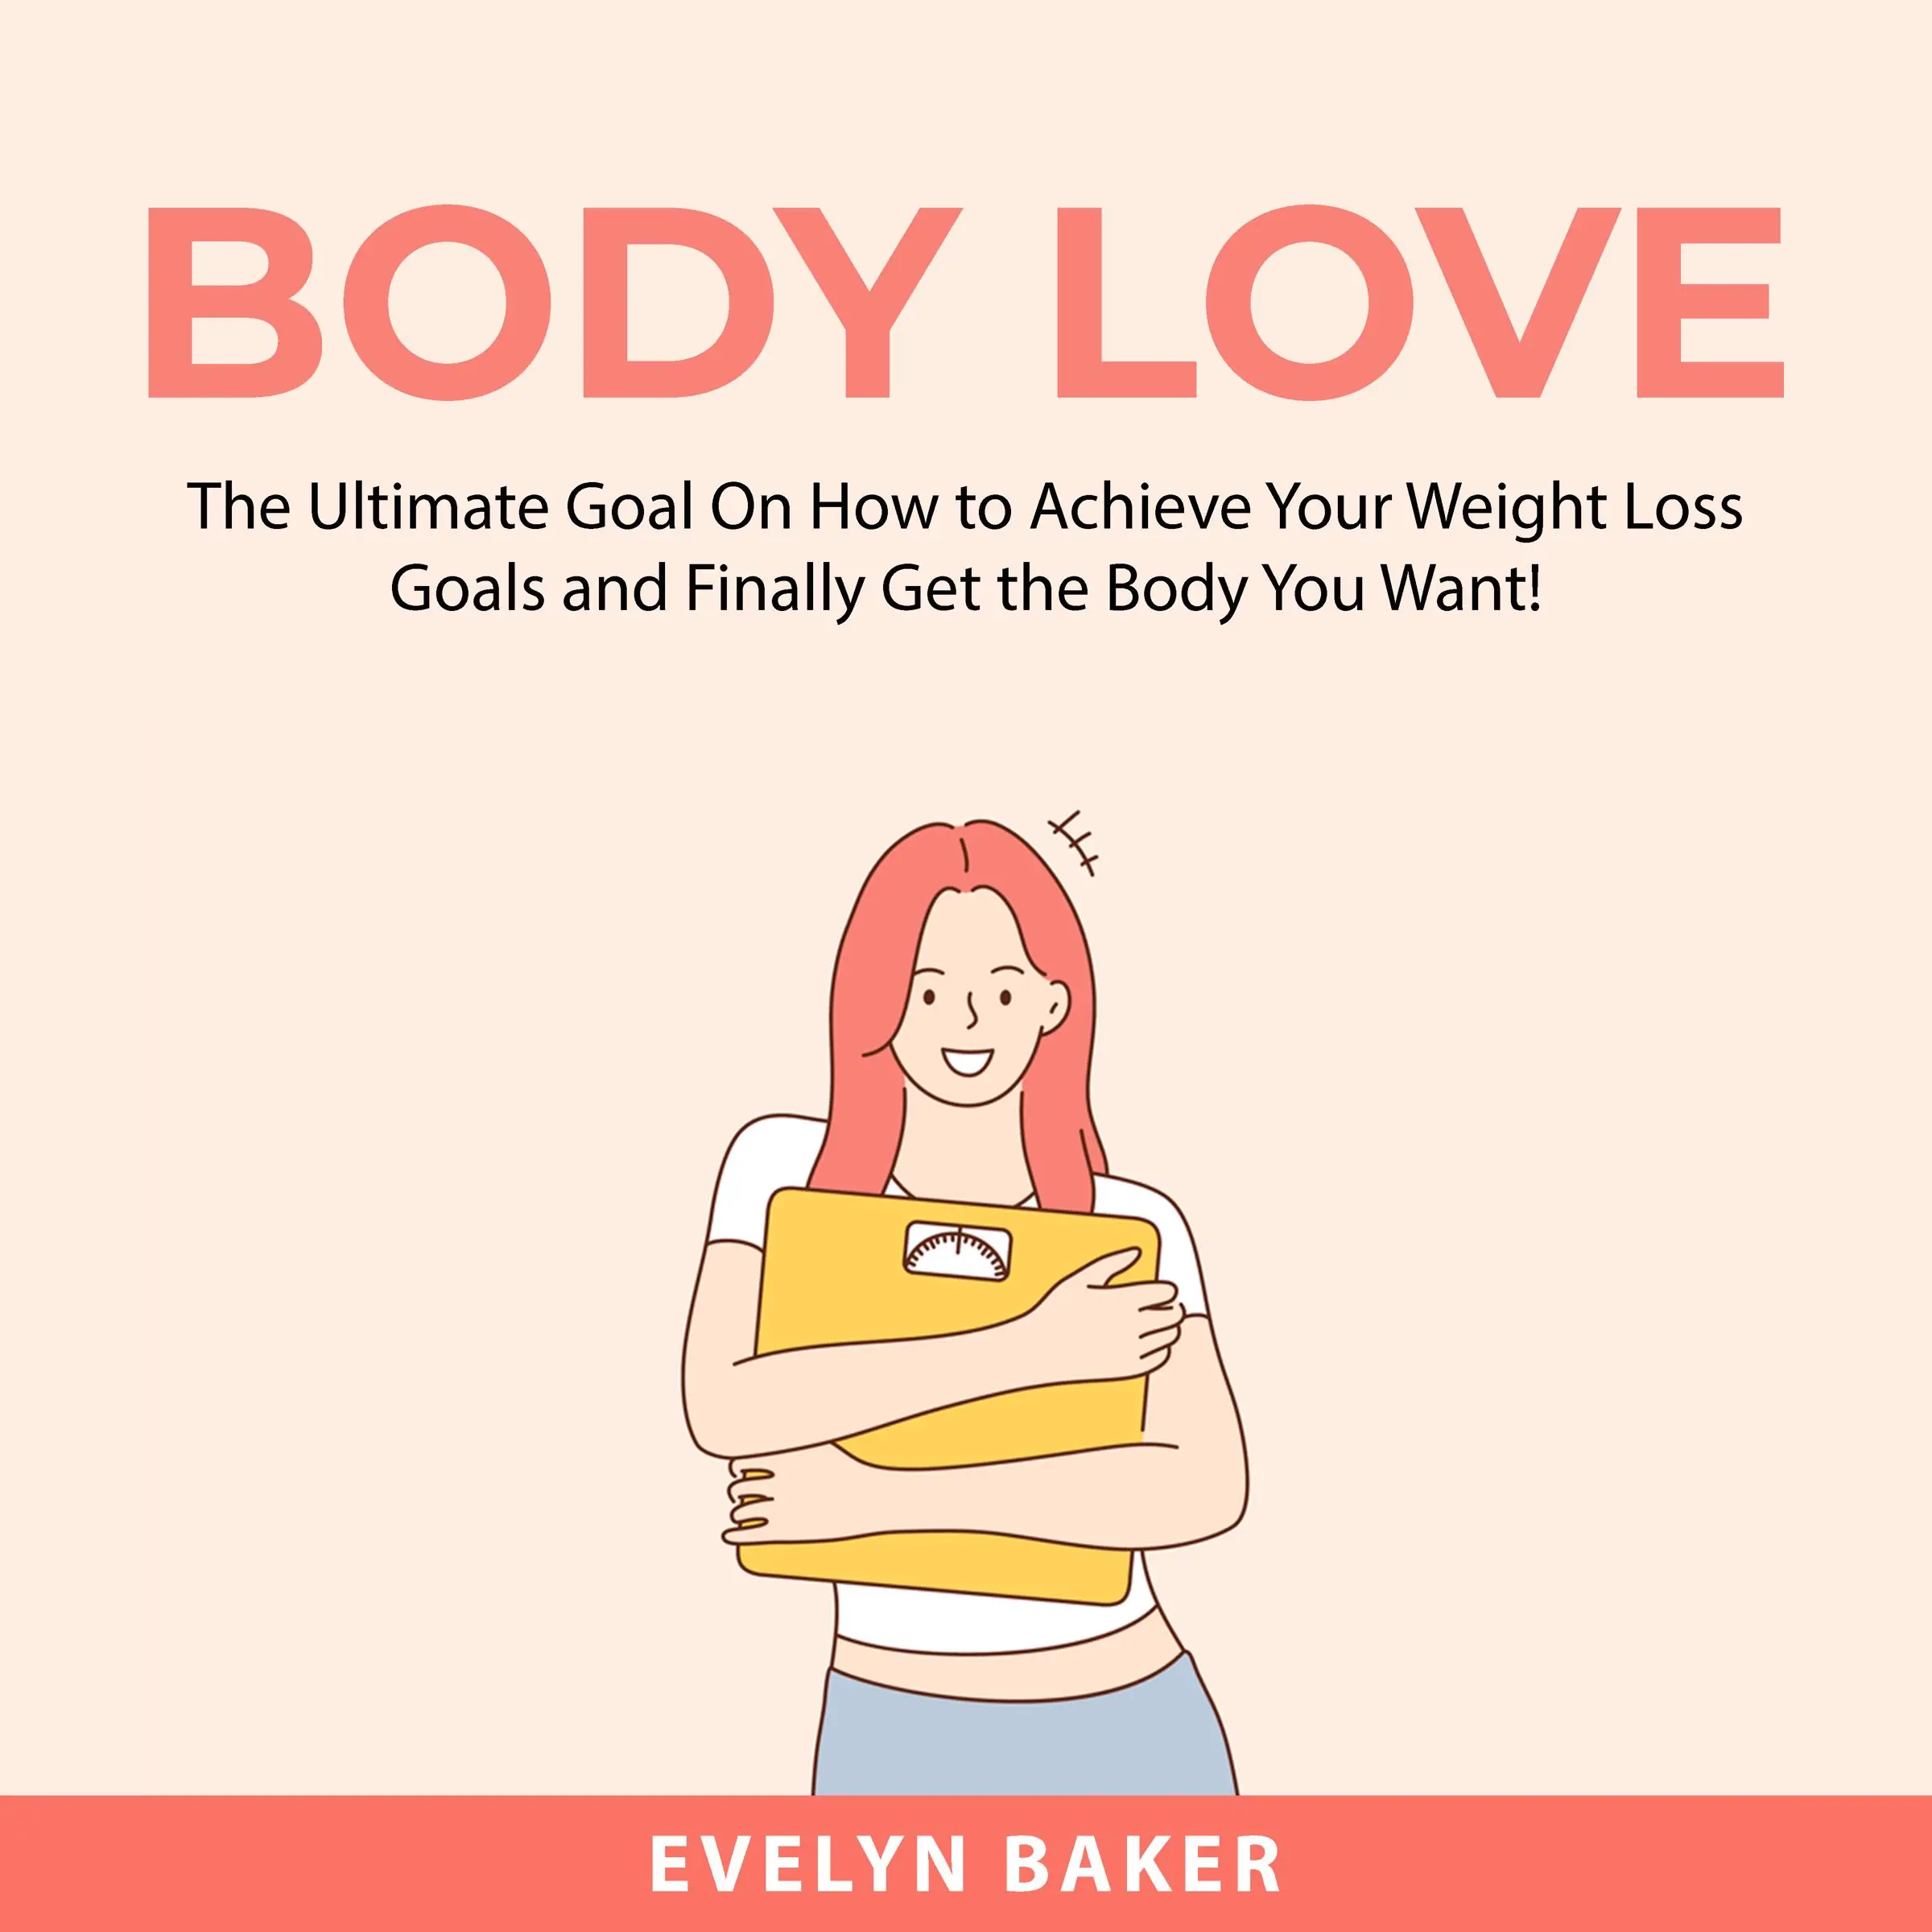 Body Love: The Ultimate Goal On How to Achieve Your Weight Loss Goals and Finally Get the Body You Want! Audiobook by Evelyn Baker